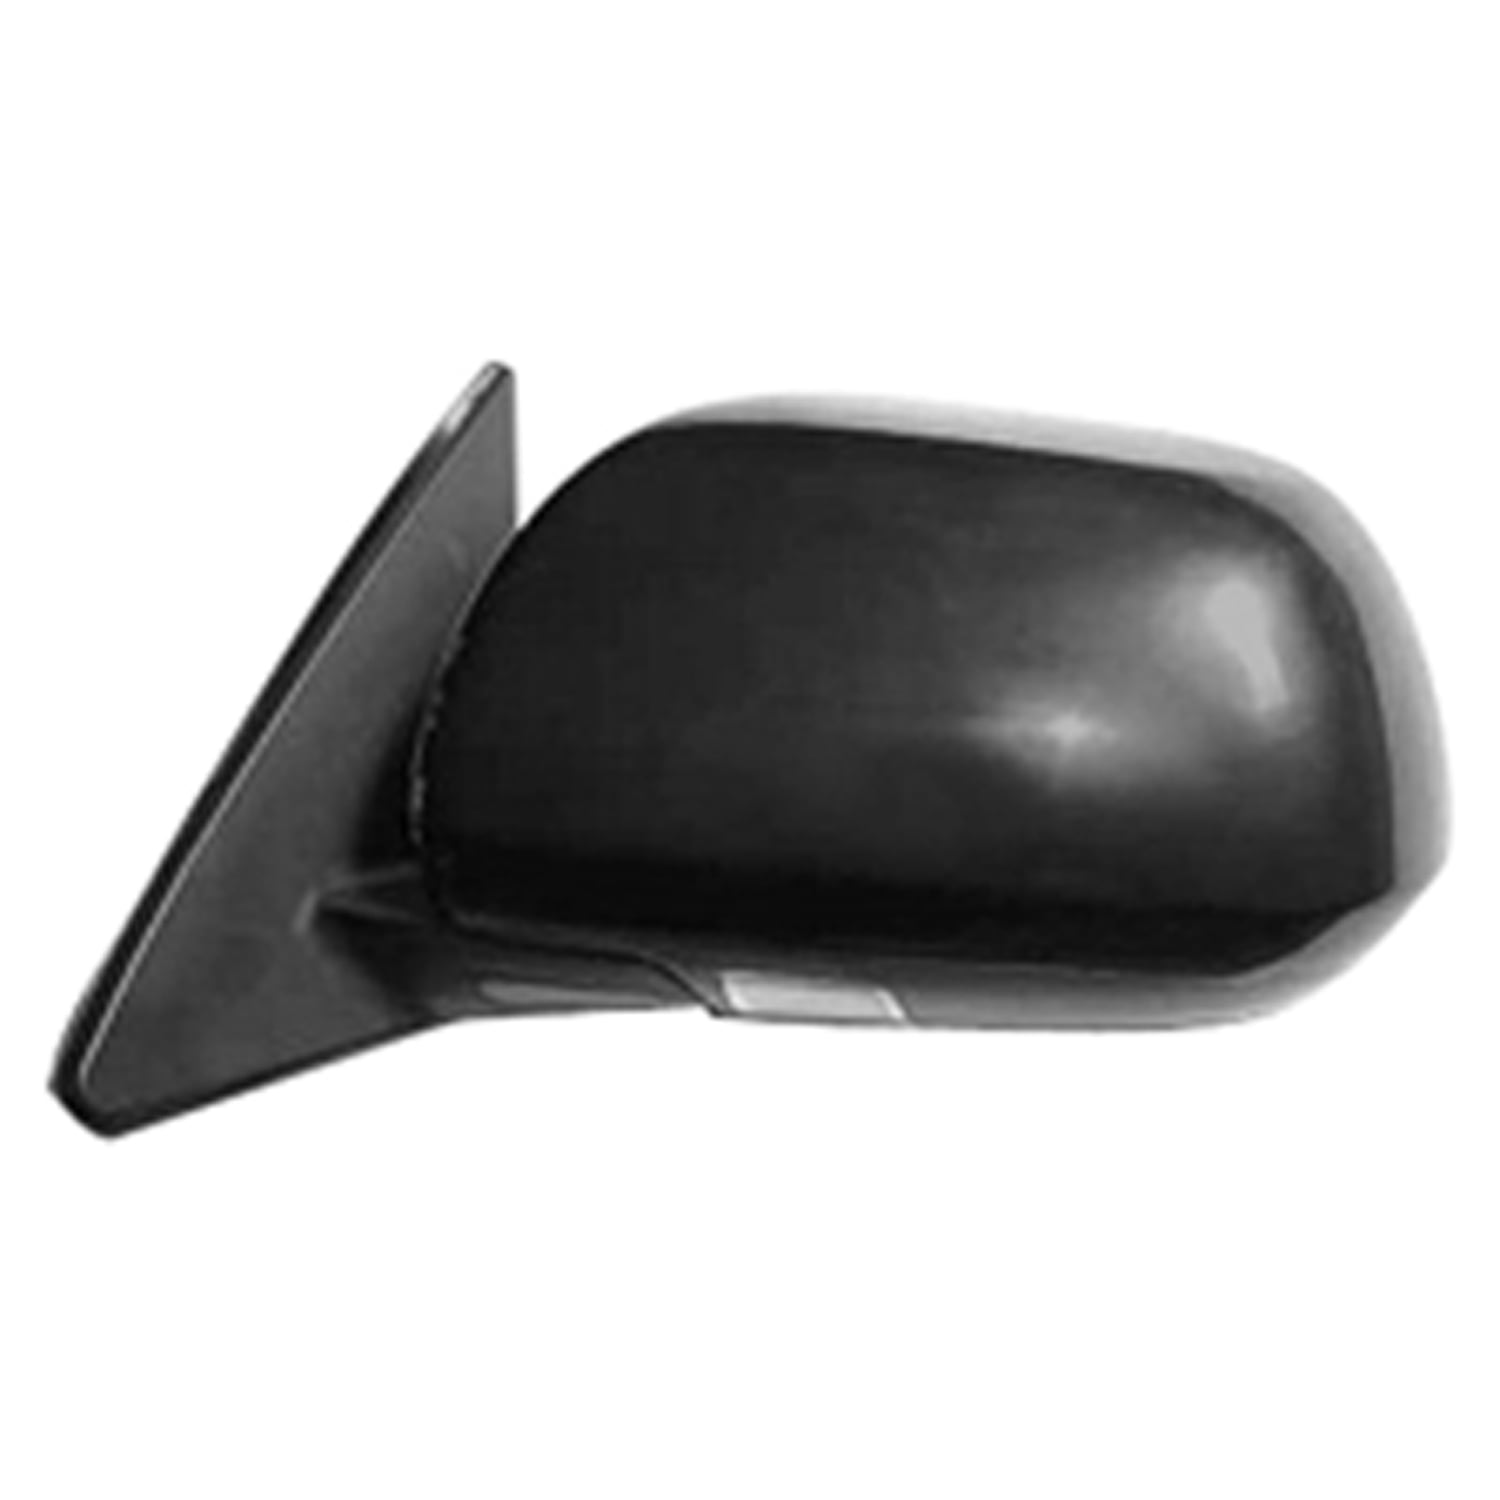 New Replacement Driver Side Mirror Glass W Backing Compatible With 2010-2013 Toyota 4Runner 2008-2013 Highlander Sold By Rugged TUFF 